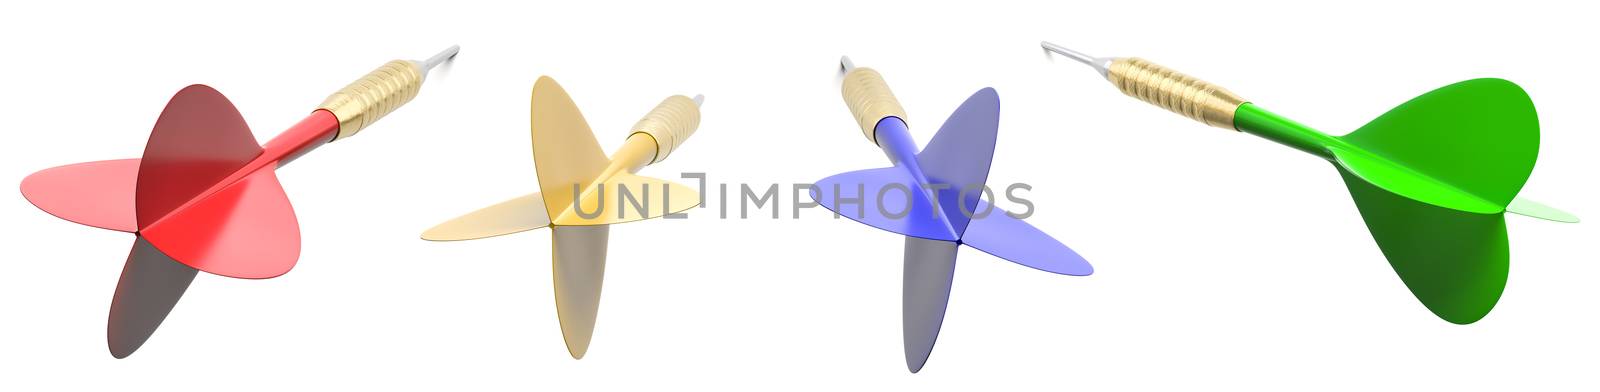 Colorful Darts Isolated on White Background by make